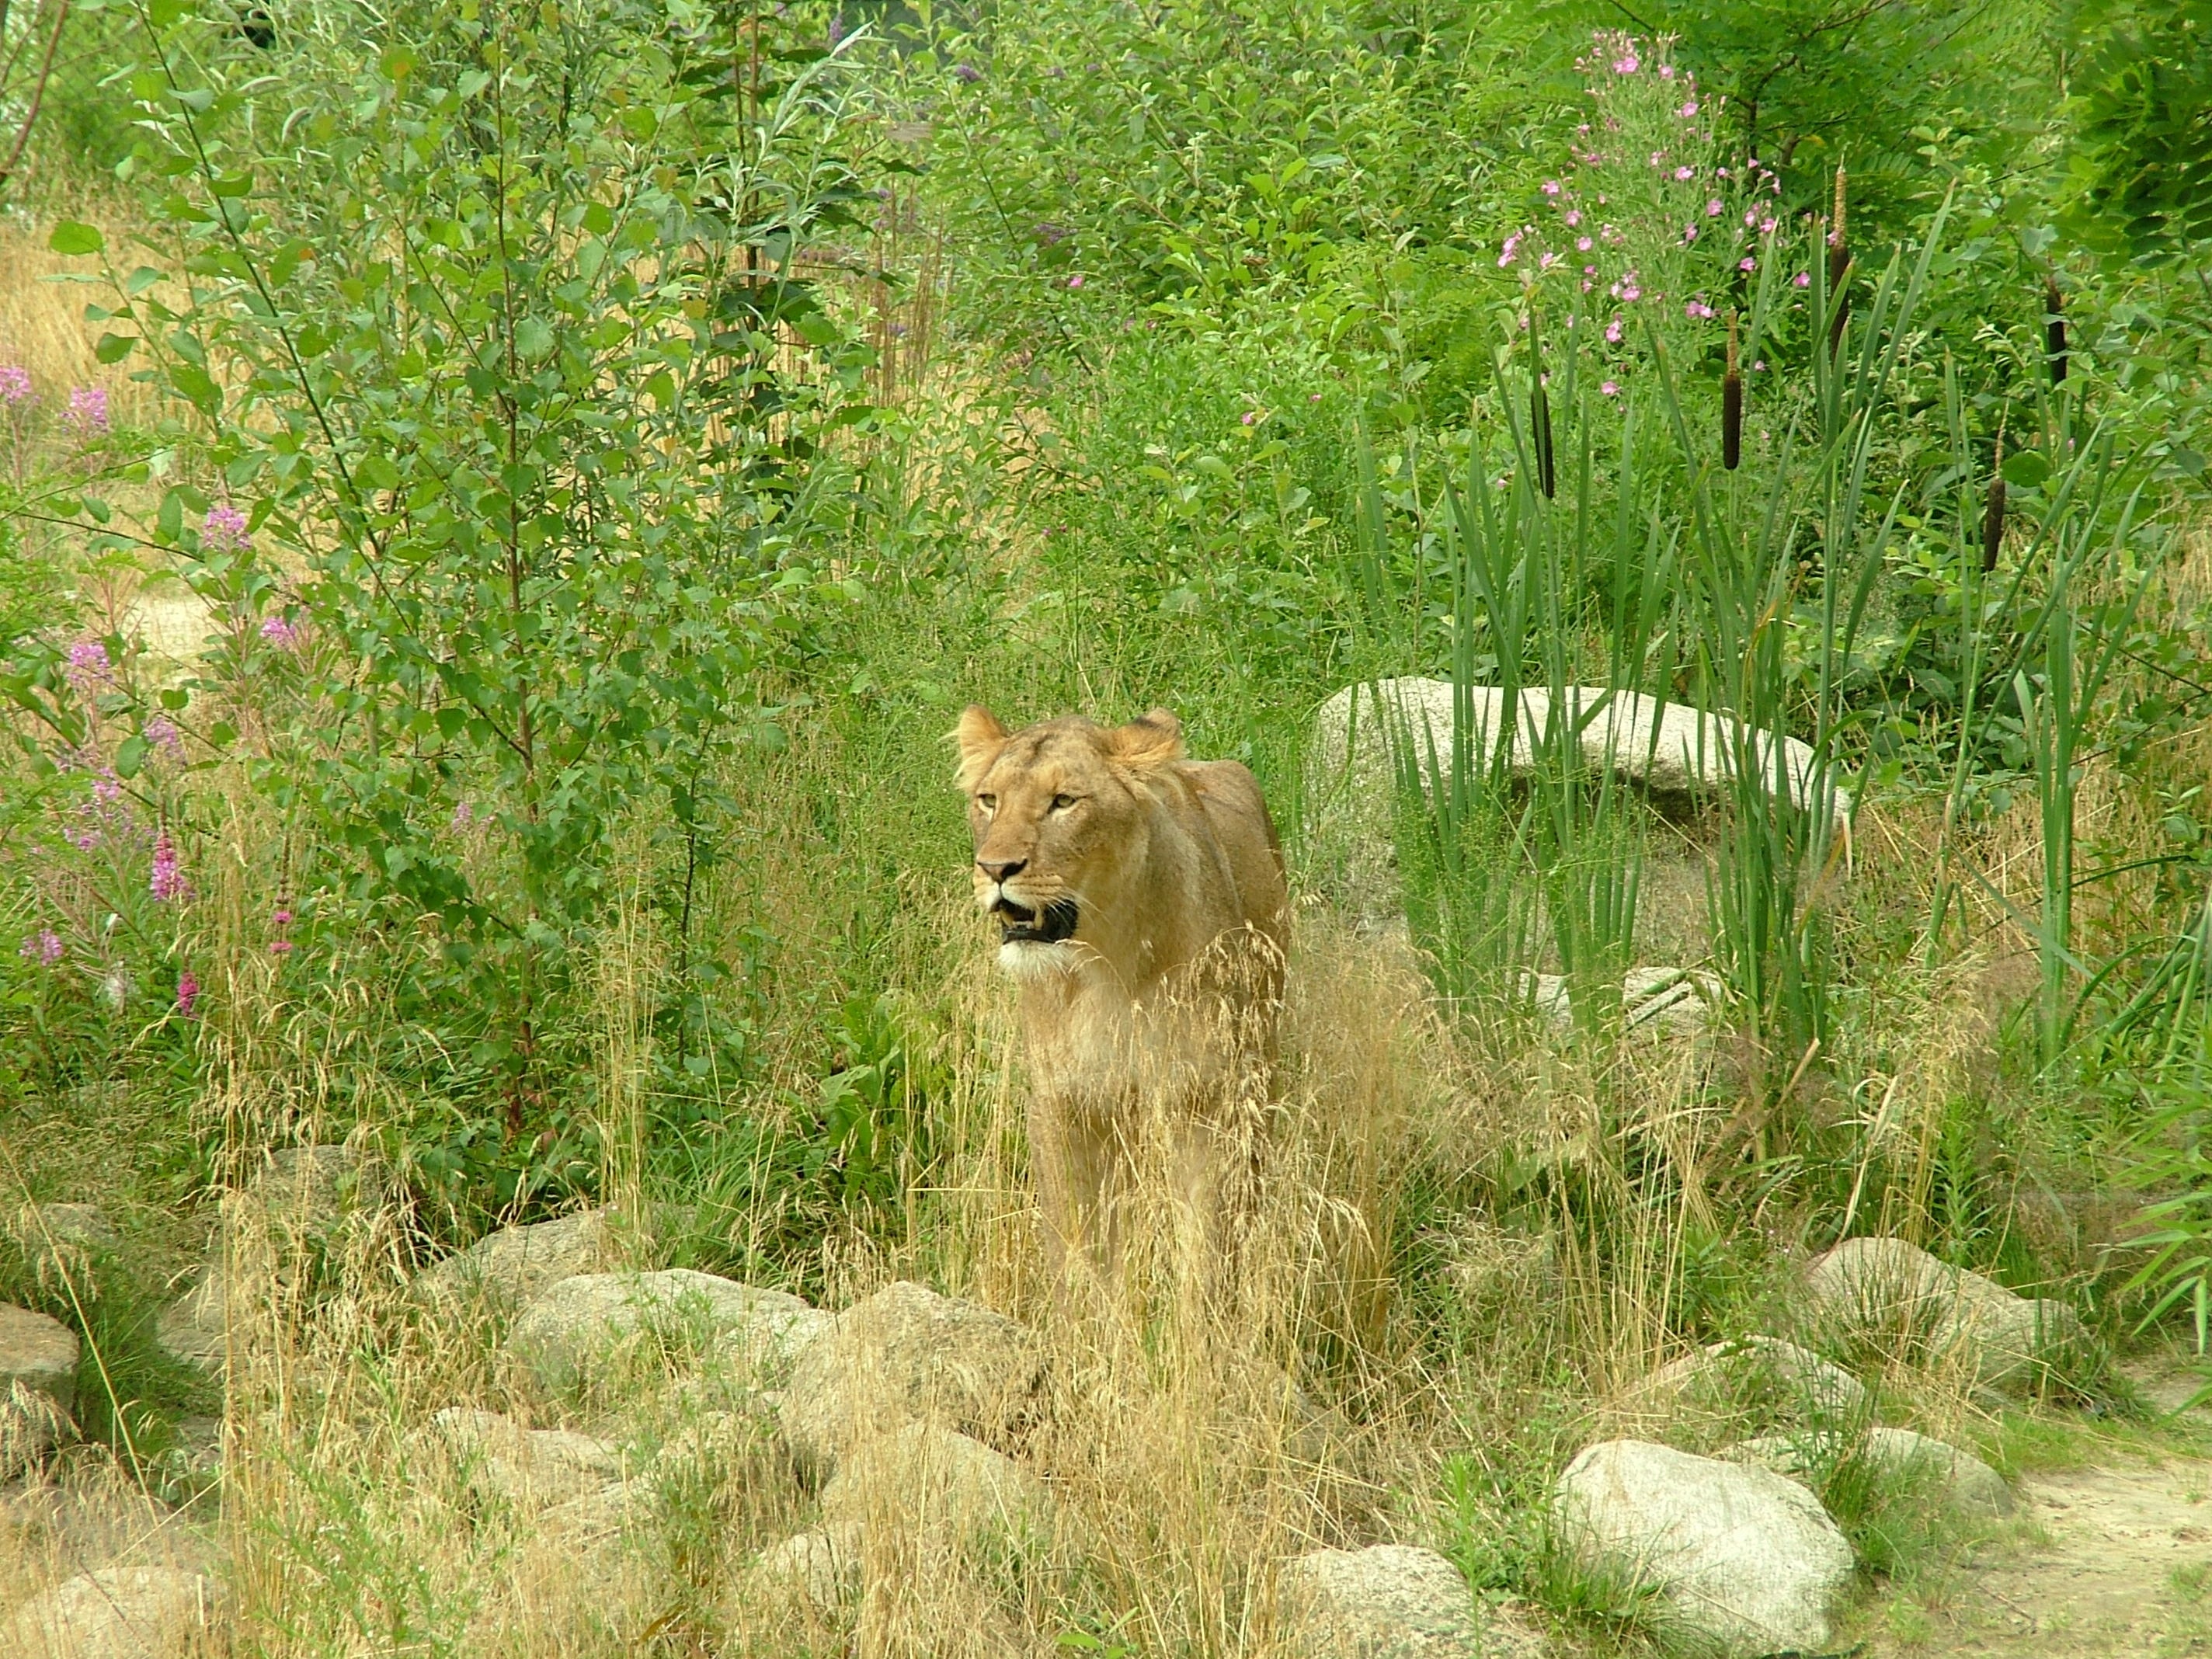 lioness surrounded by tall grass during daytime